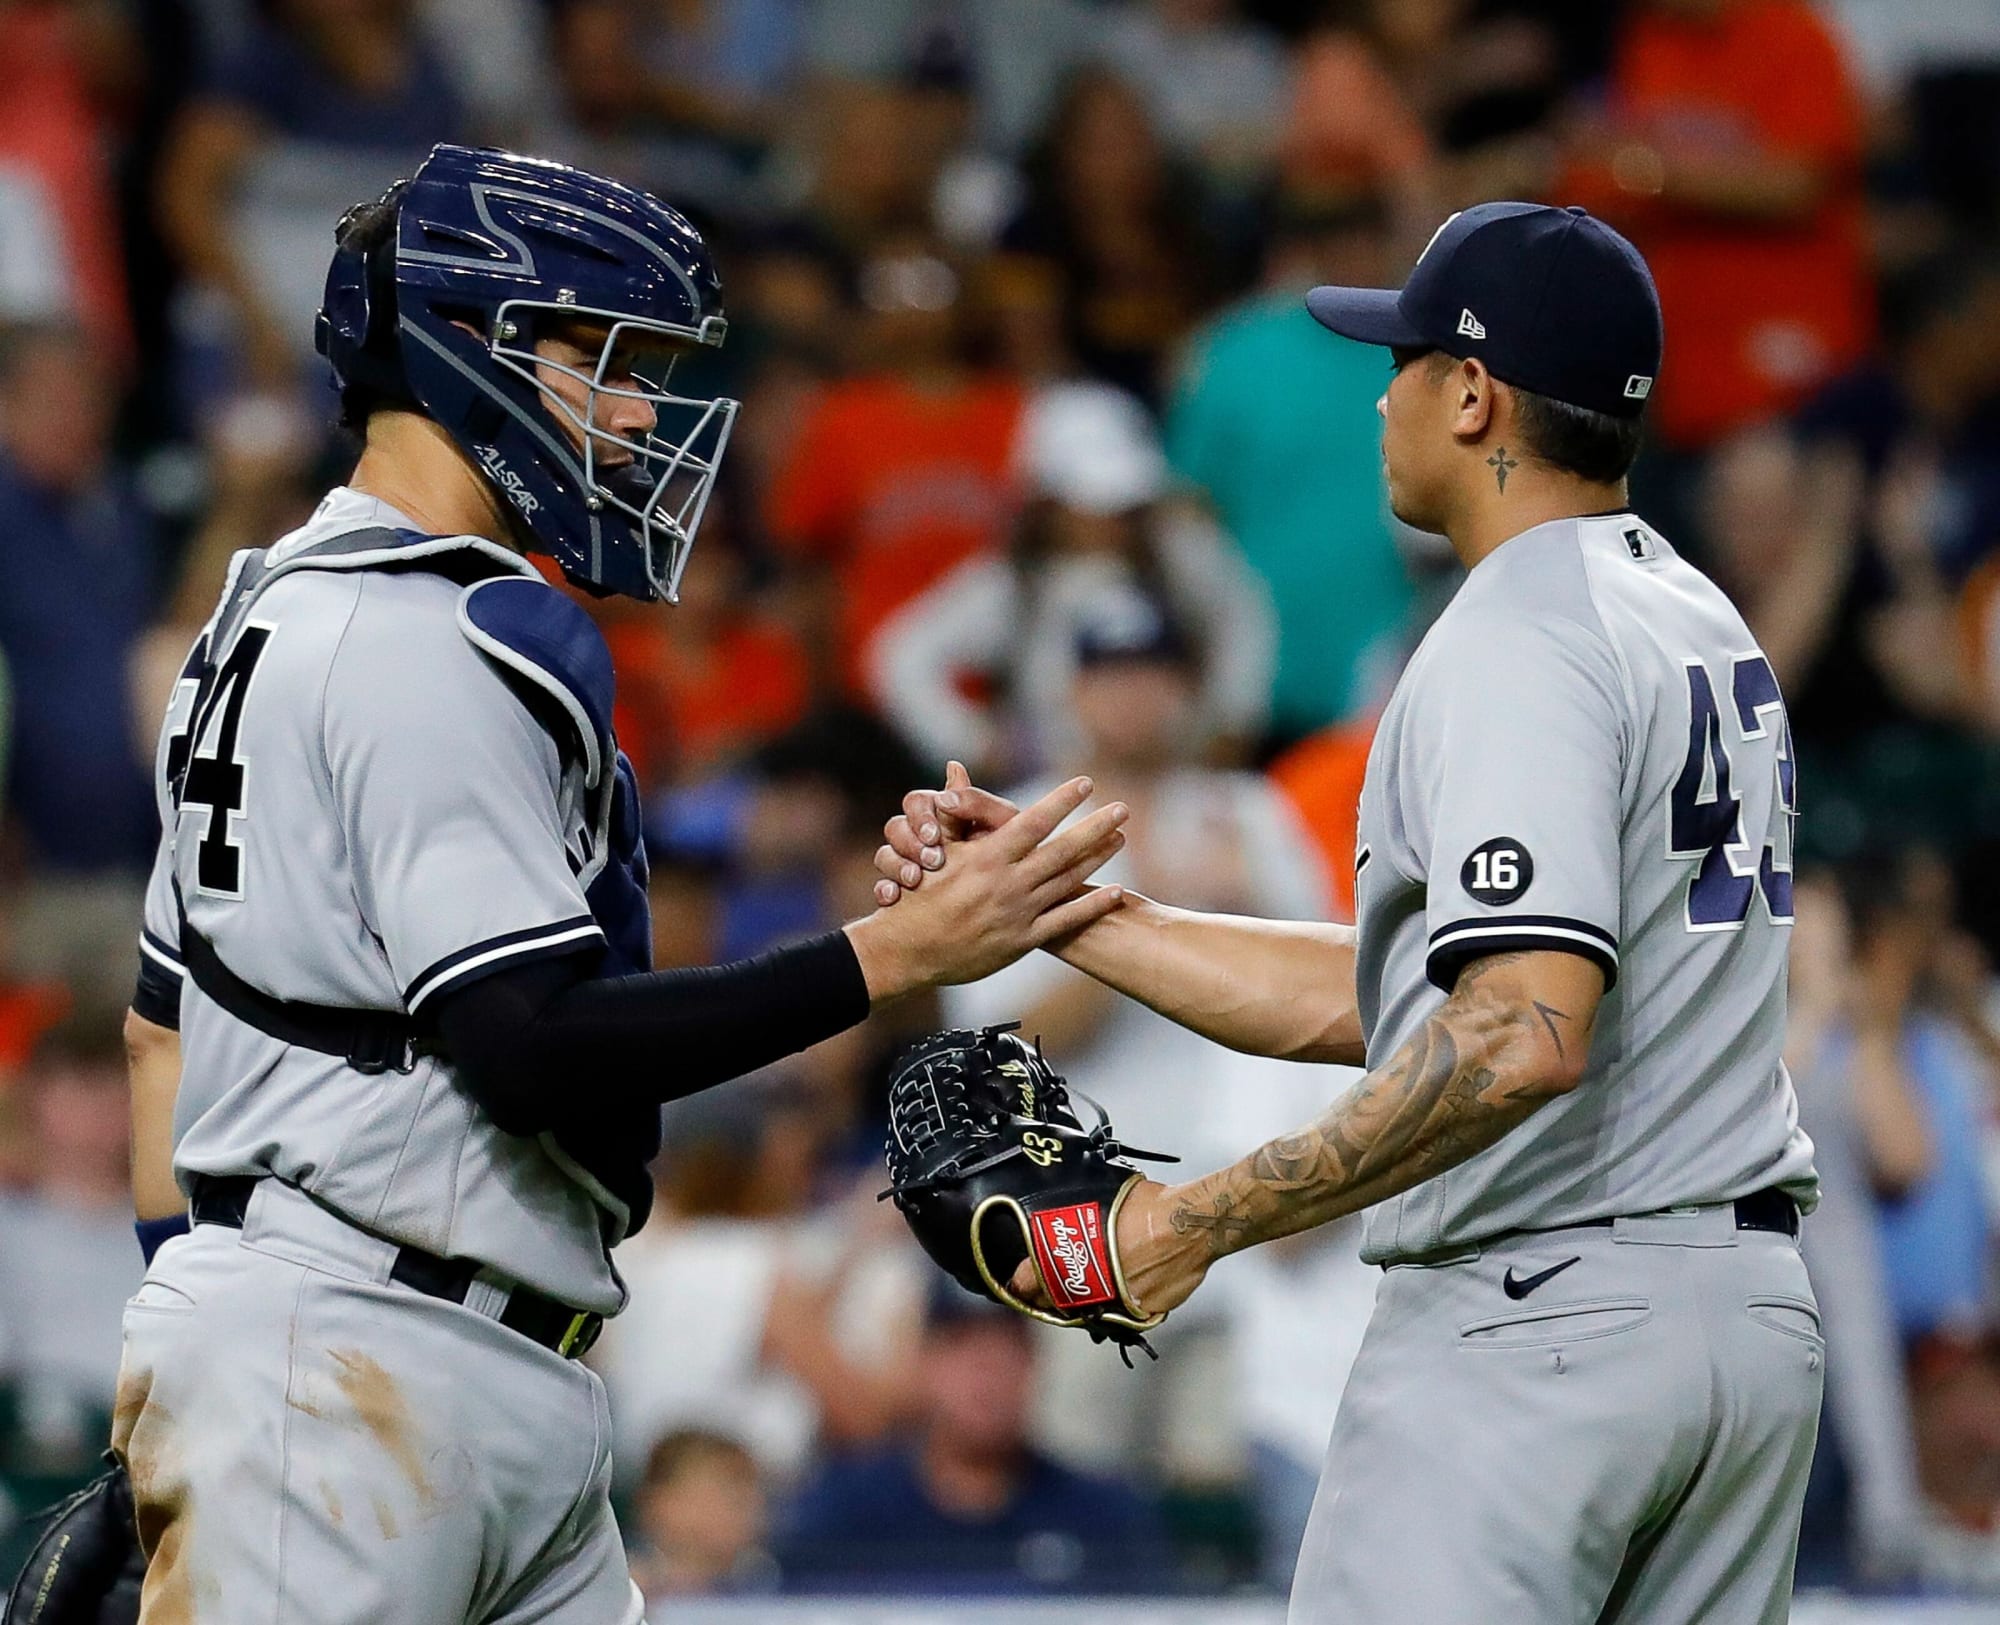 Yankees Game Today Yankees vs Astros Odds, Starting Lineup, Pitching